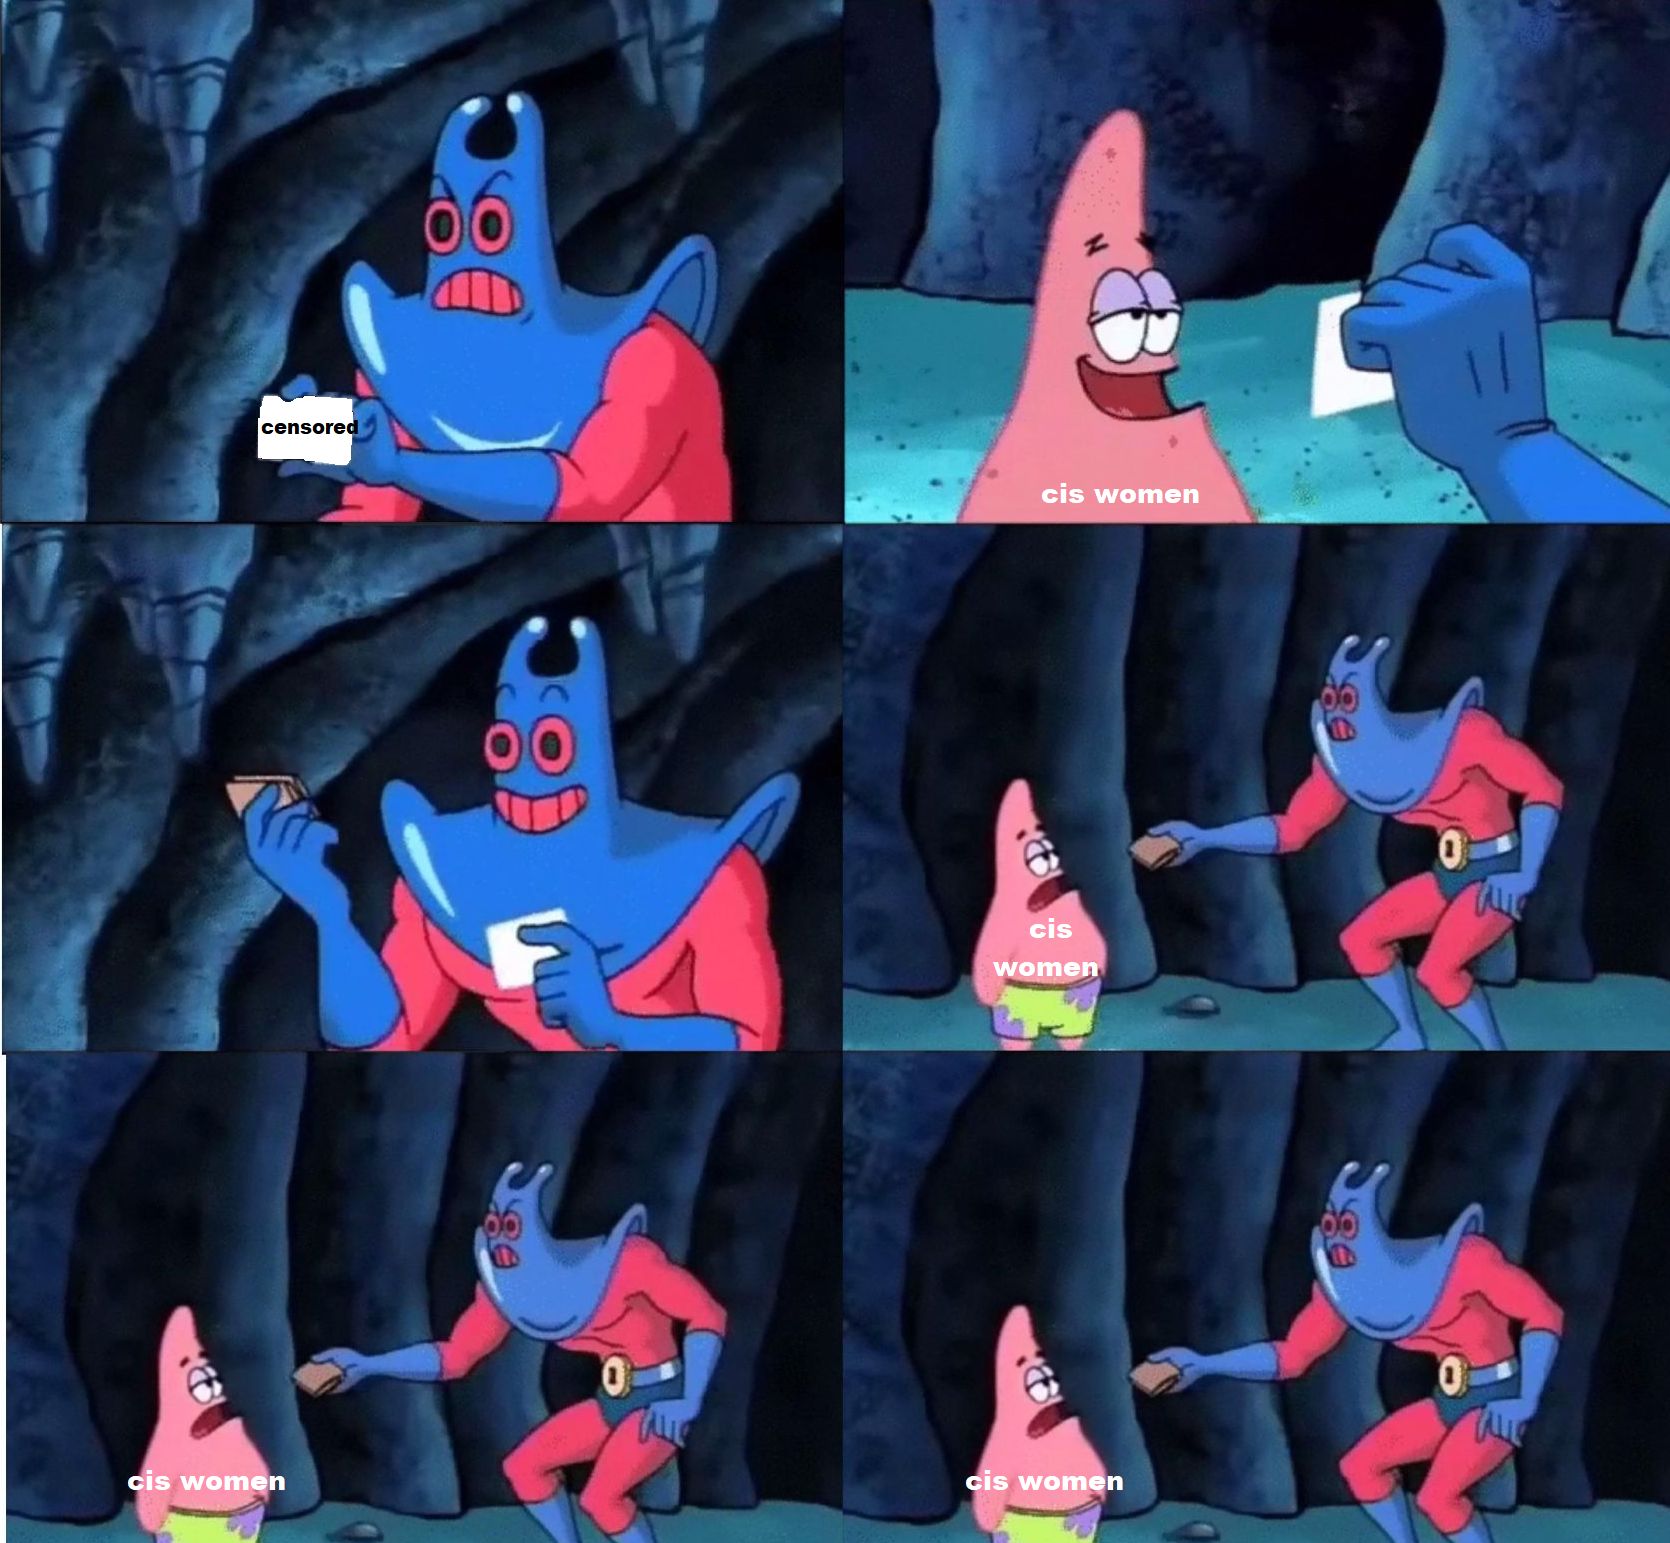 No "patrick star wallet" memes have been featured yet. 